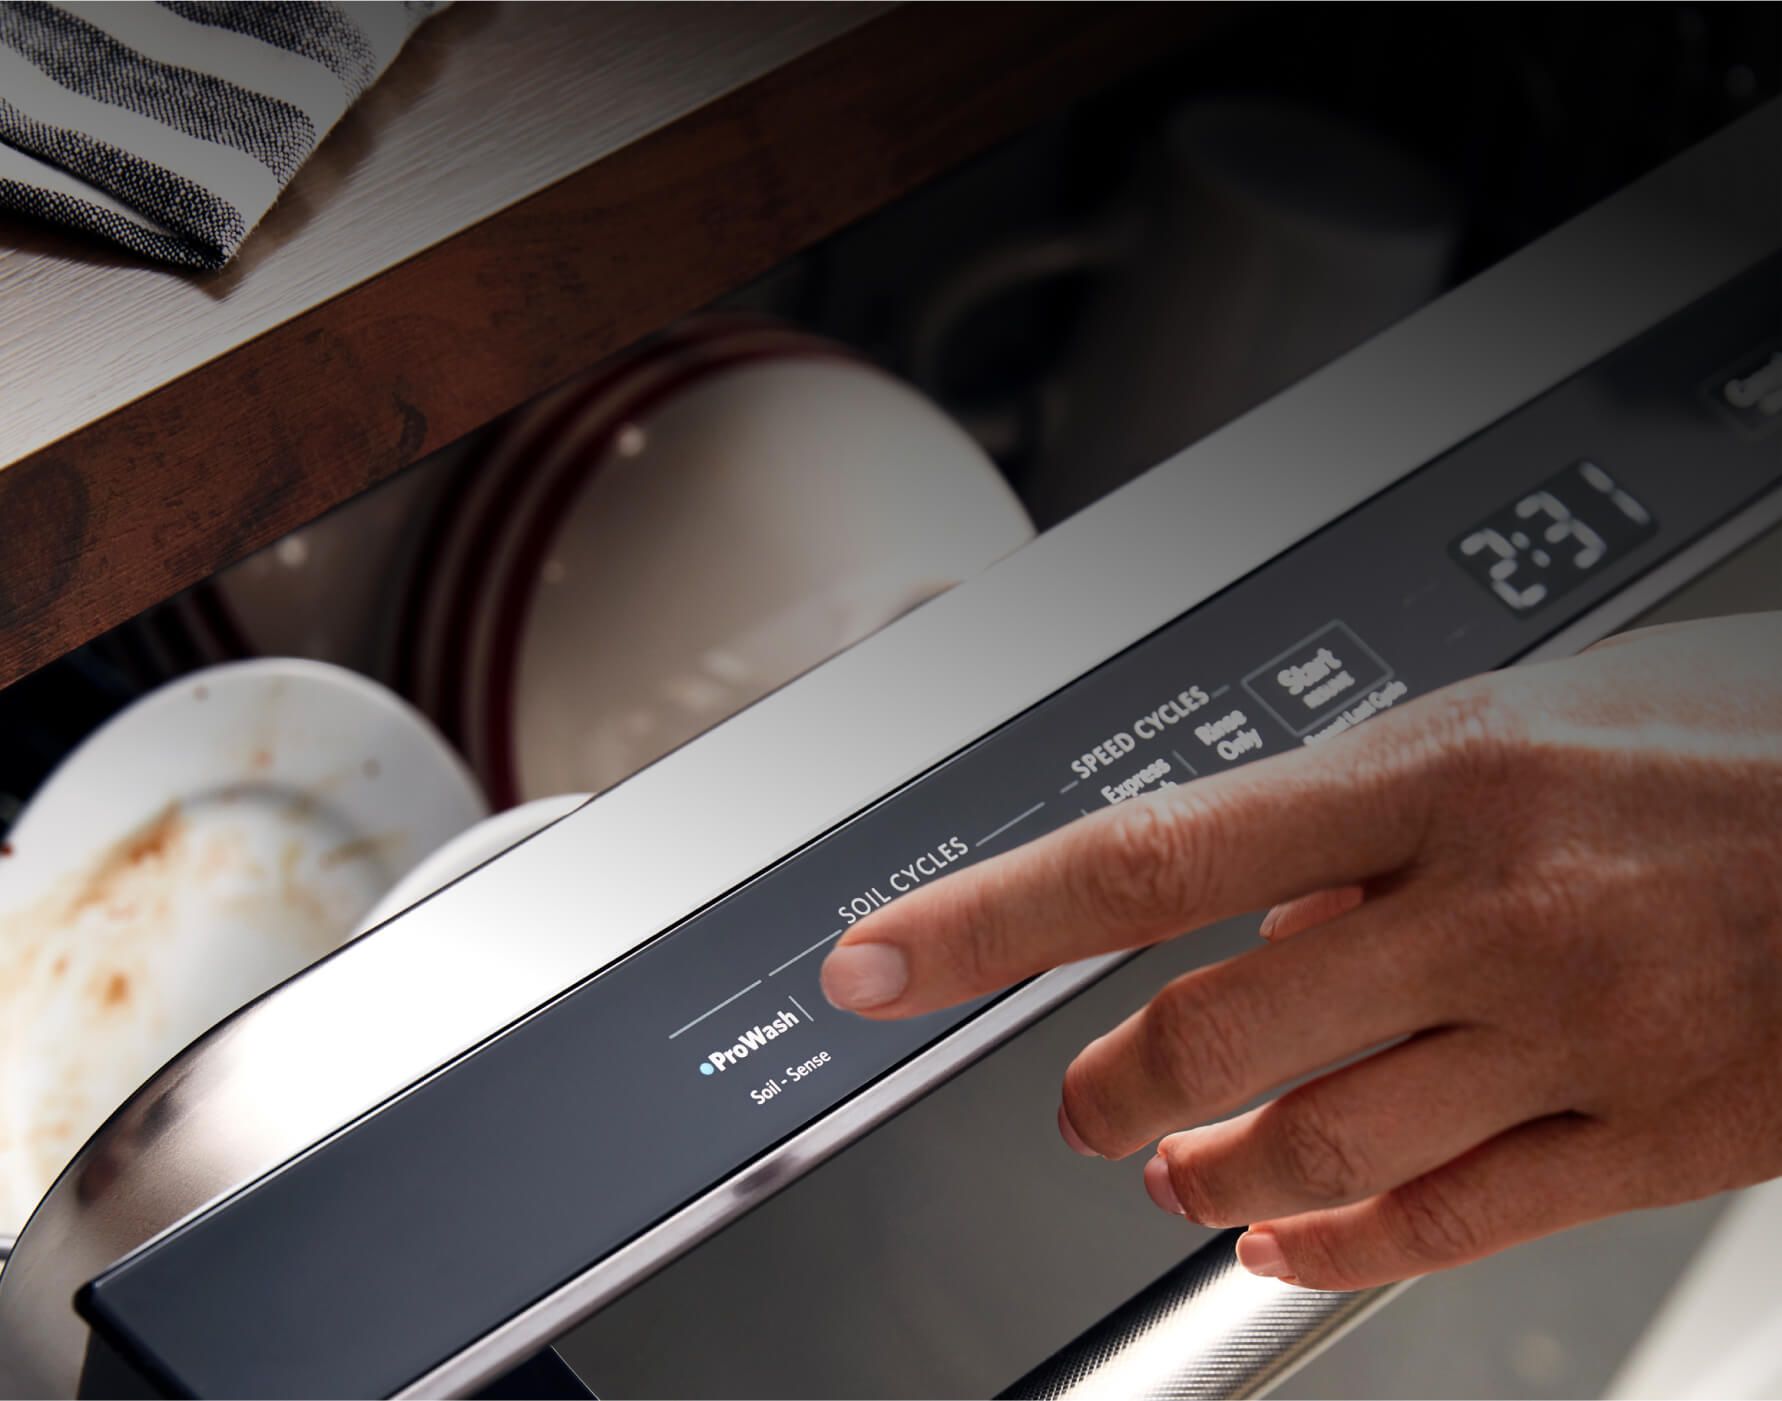 A hand closes the dishwasher — showing us the hidden controls, digital clock and the iconic KitchenAid handle.